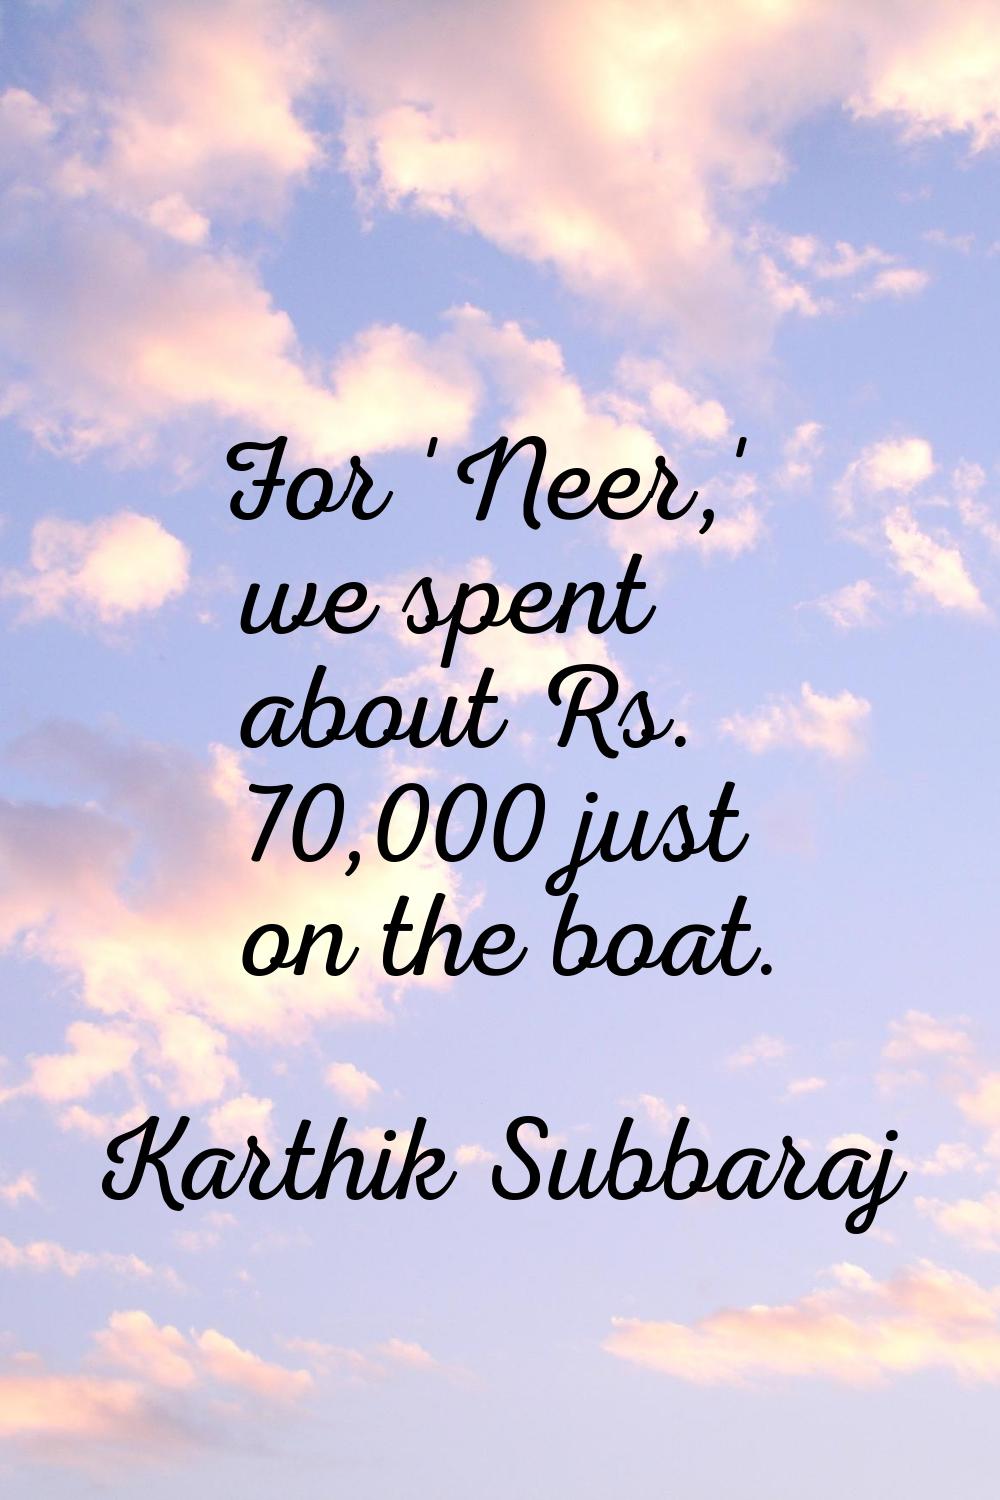 For 'Neer,' we spent about Rs. 70,000 just on the boat.